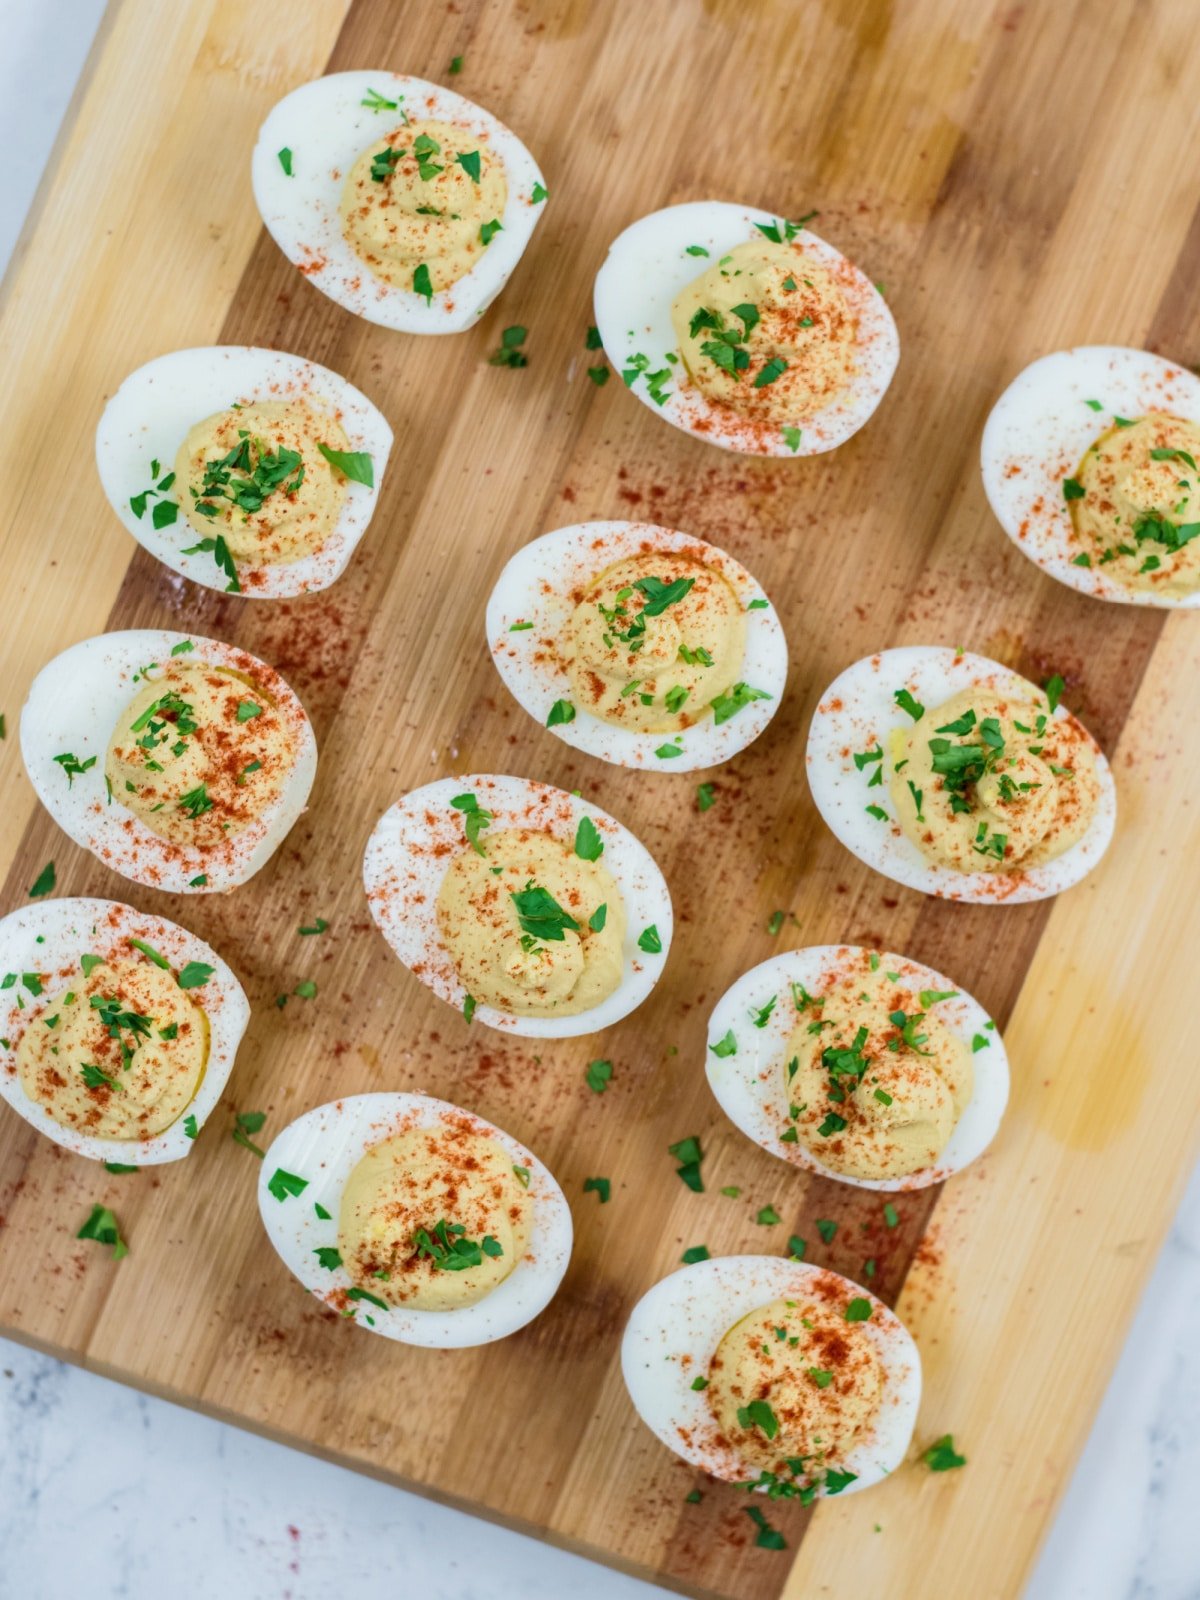 Top hummus deviled eggs with paprika and garnish